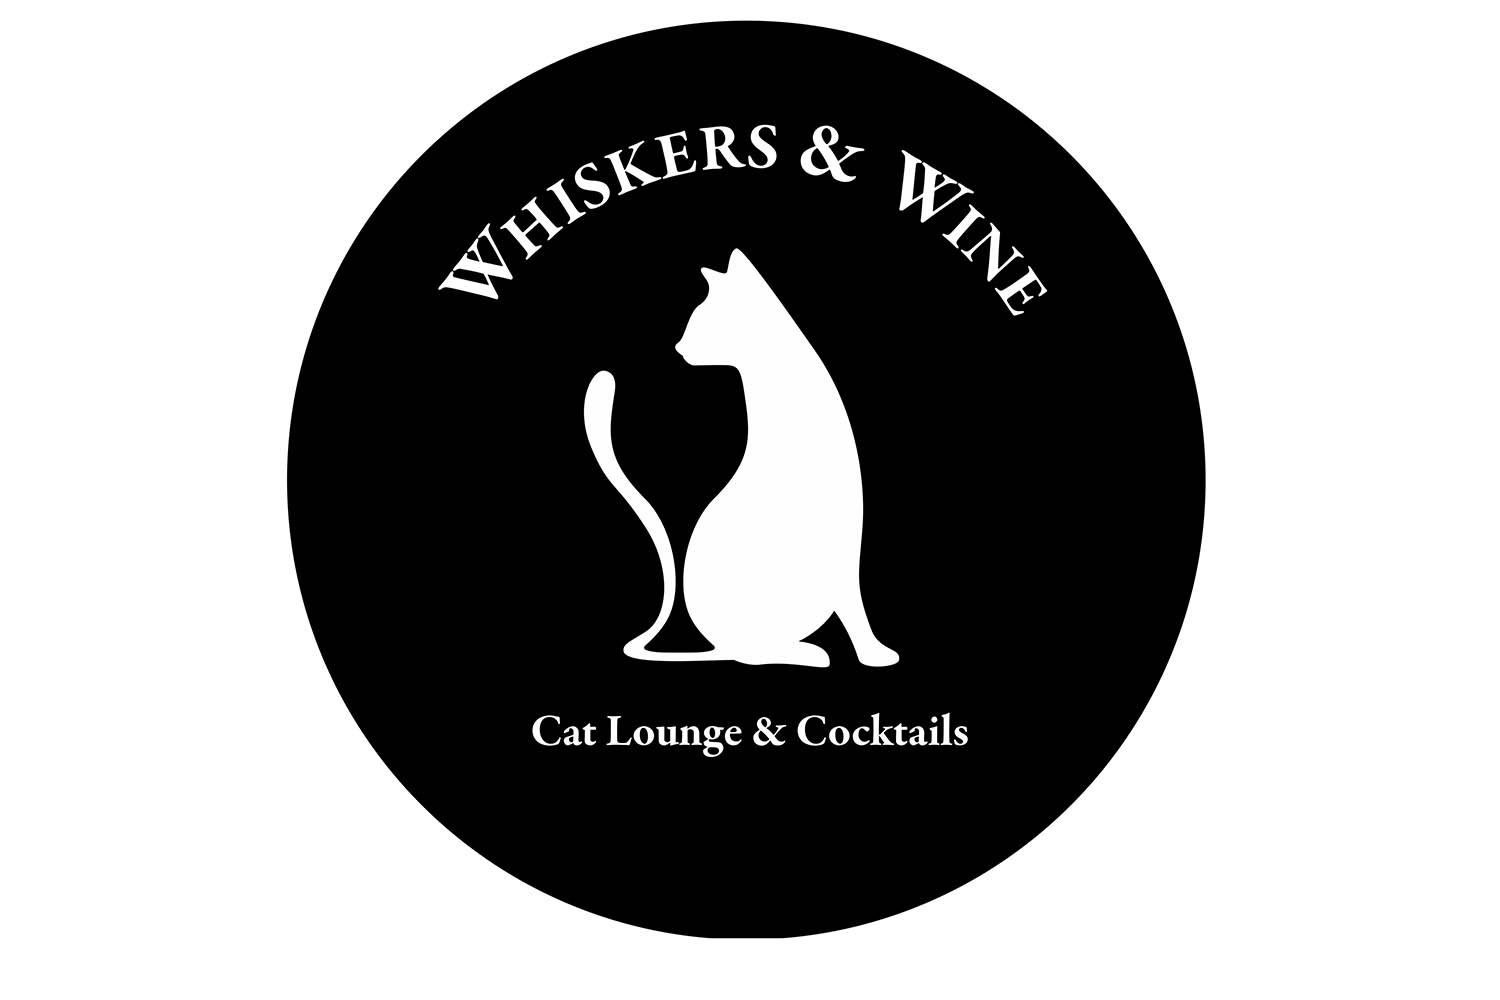 16-intriguing-facts-about-whiskers-and-wine